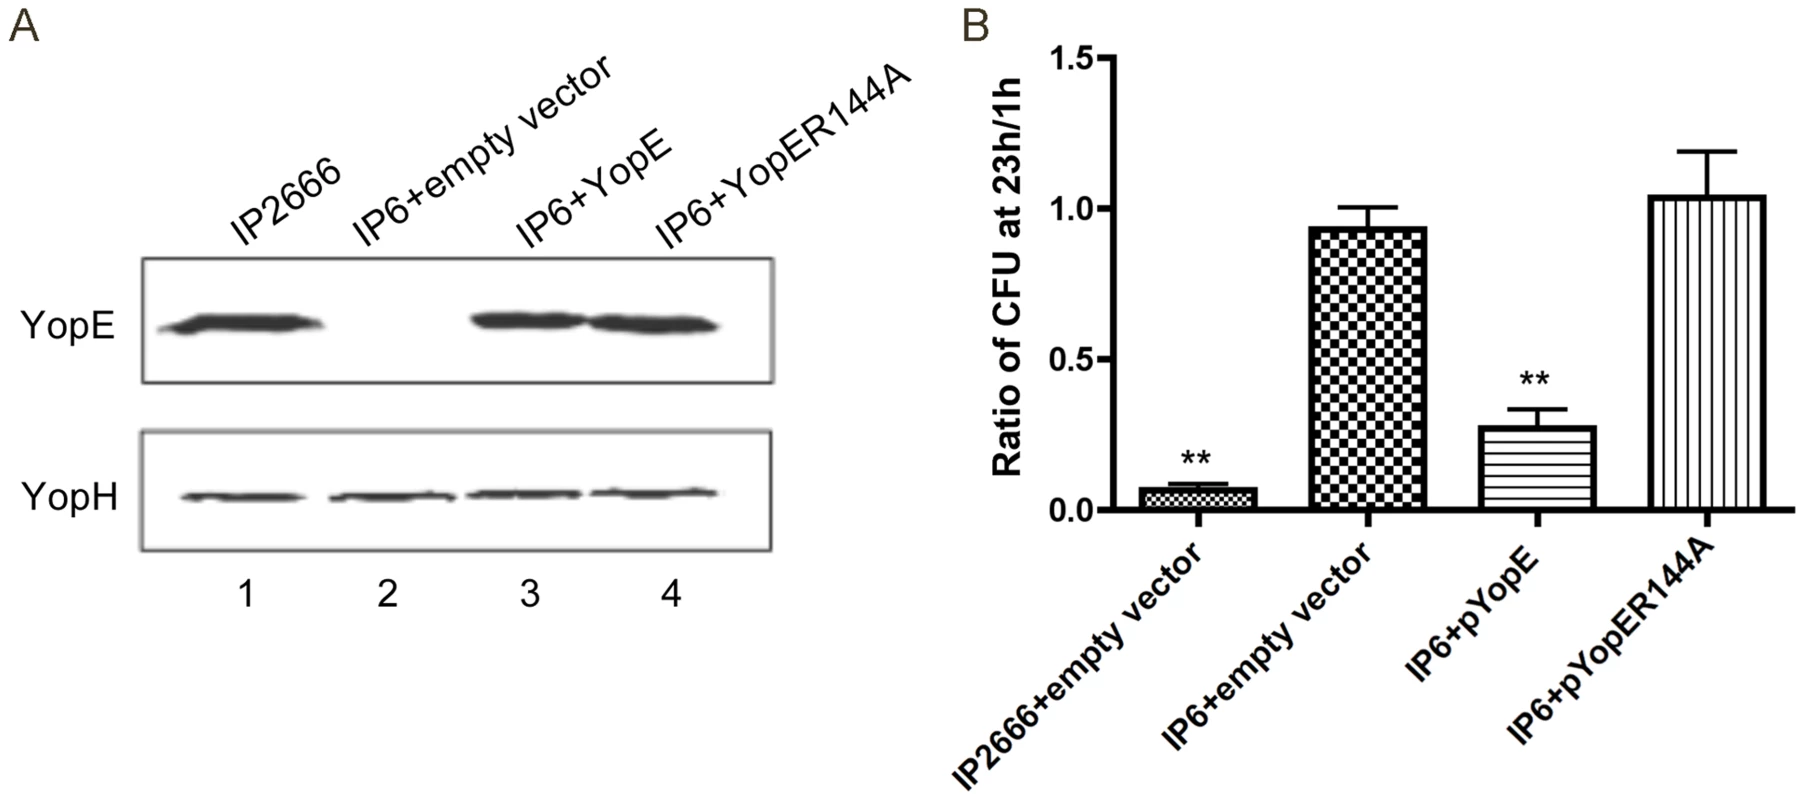 Measurement of YopE production and survival in macrophages by different <i>Y. pseudotuberculosis</i> strains.